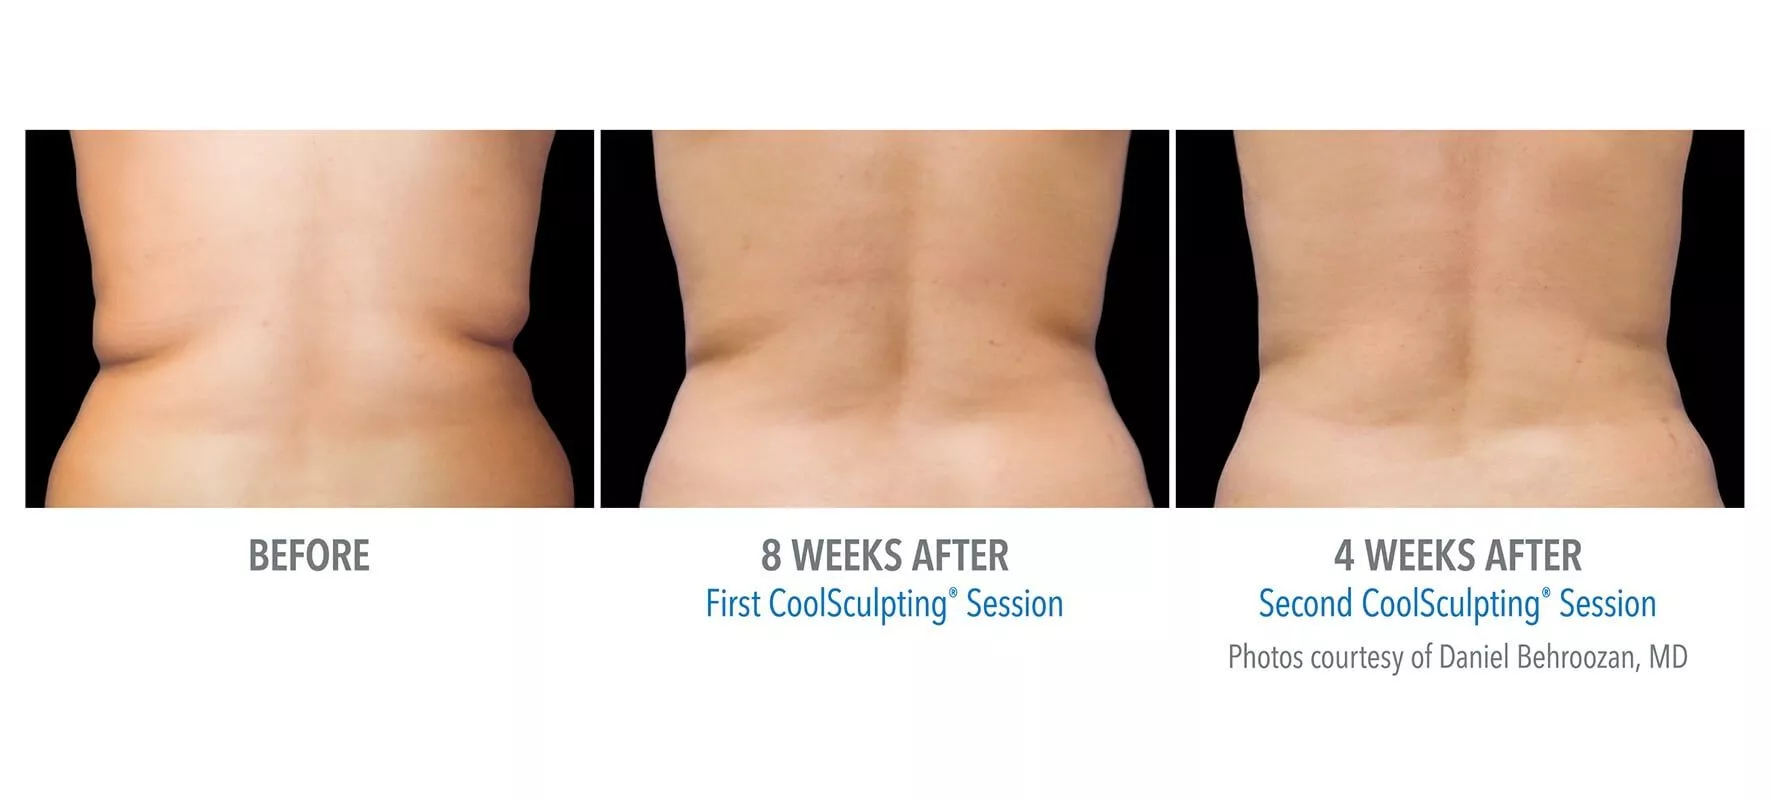 Female CoolSculpting patient in Las Vegas. Before and after photos of flanks post first and second CoolSculpting treatments.